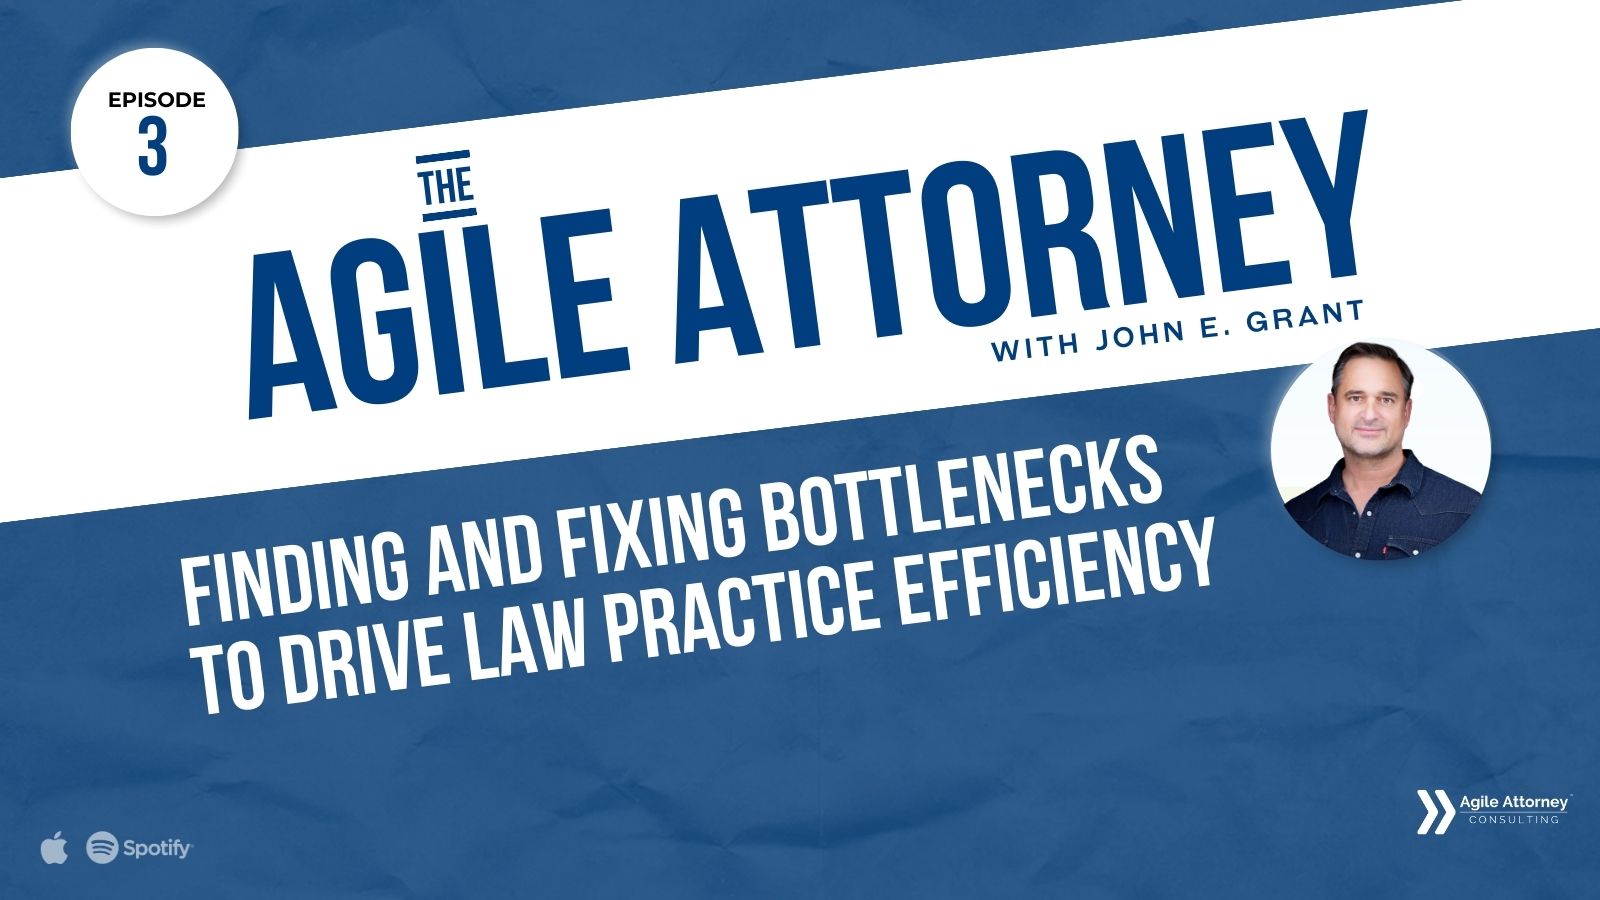 The Agile Attorney with John E. Grant | Finding and Fixing Bottlenecks to Drive Law Practice Efficiency